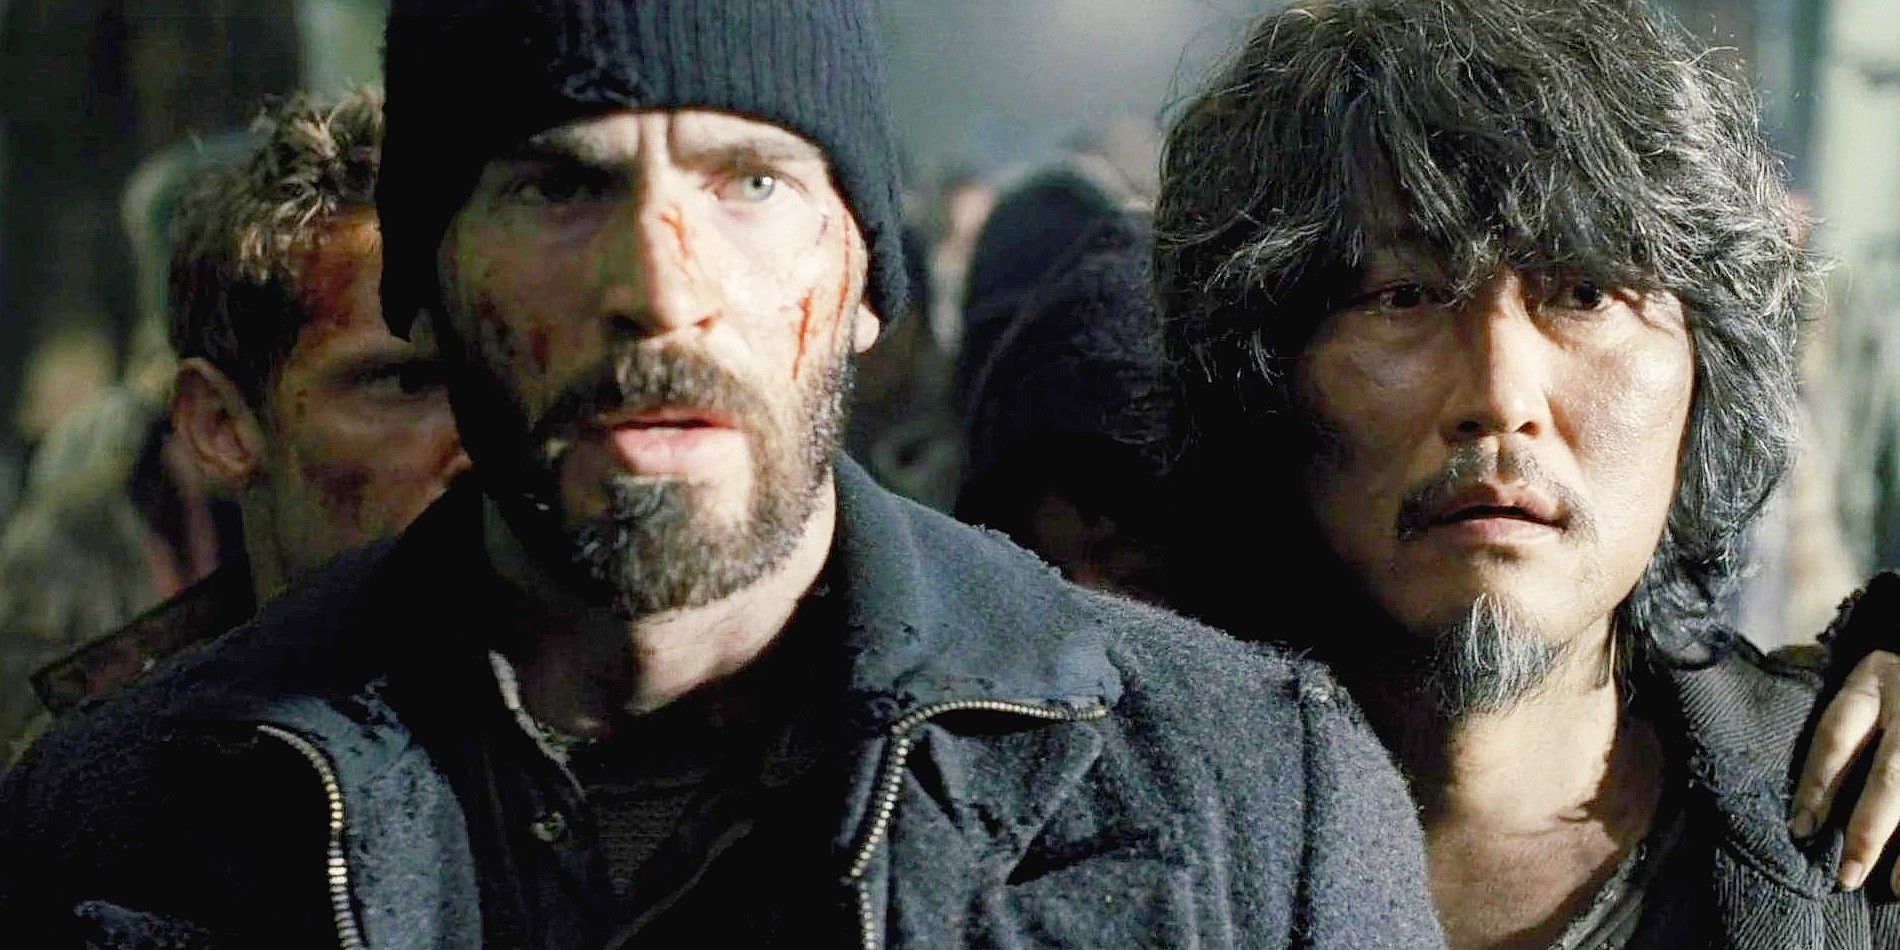 Chris Evans and Song Kang-Ho next to each other looking stunned in Snowpiercer